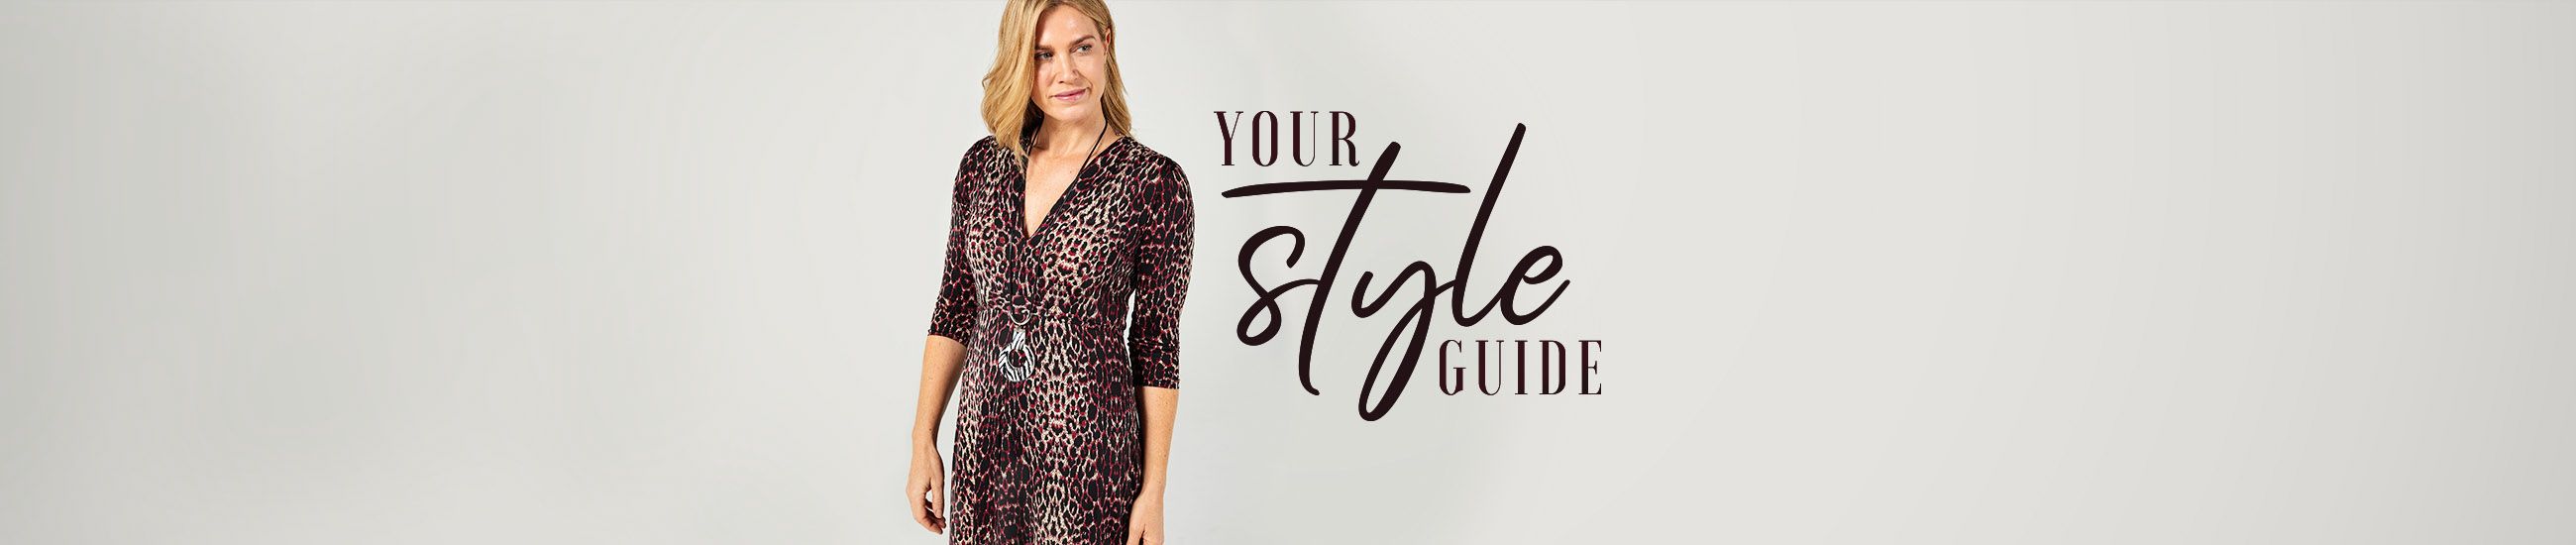 Your Style Guide - Call of the Wild